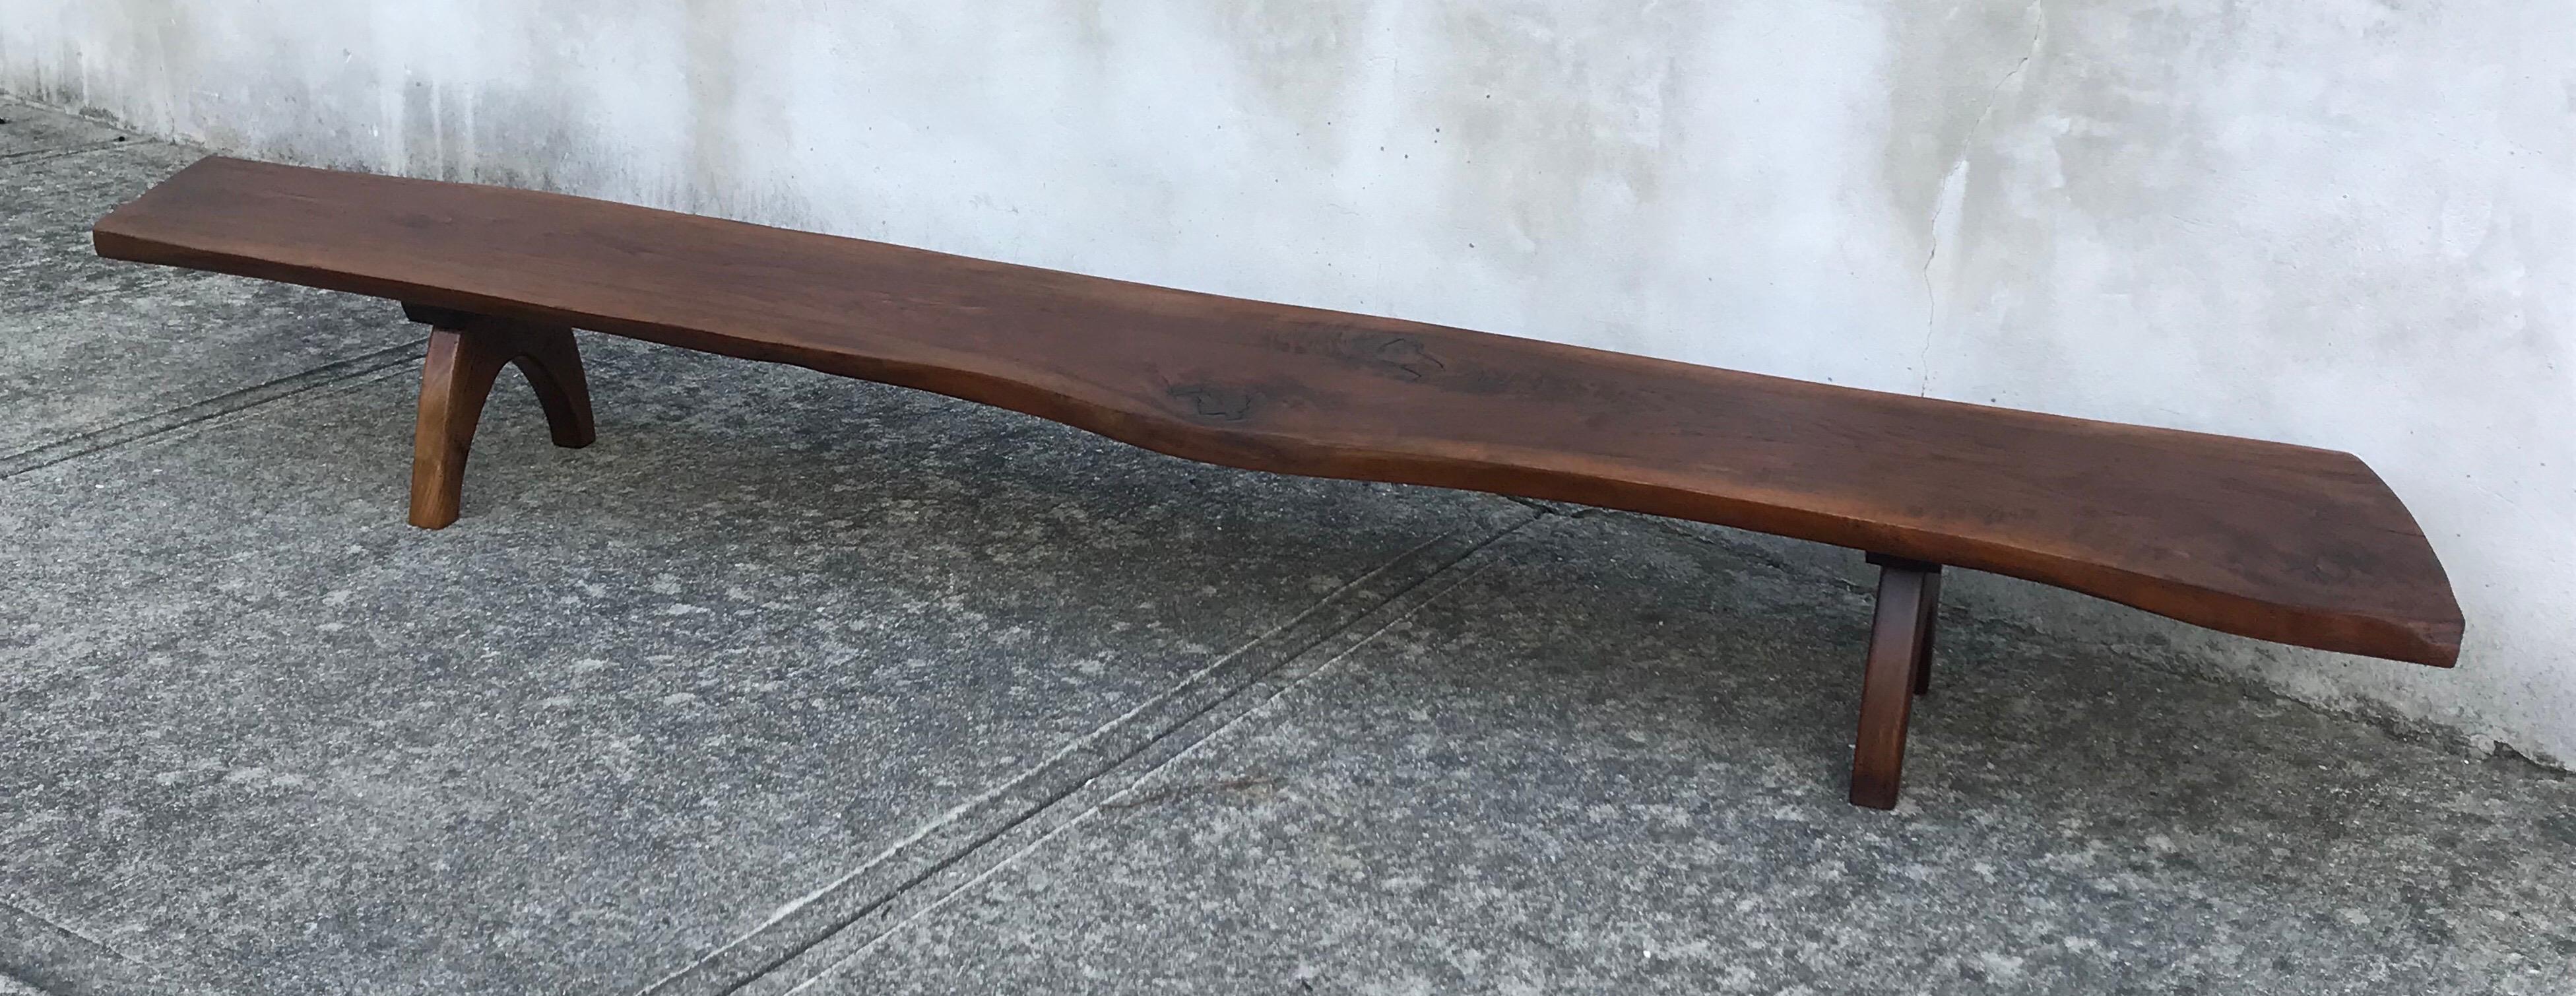 Beautiful nine foot long bench, live edge black walnut. Acquired near New Hope PA, possibly crafted by a disciple or understudy of George Nakashima, early 1950s. Not documented.